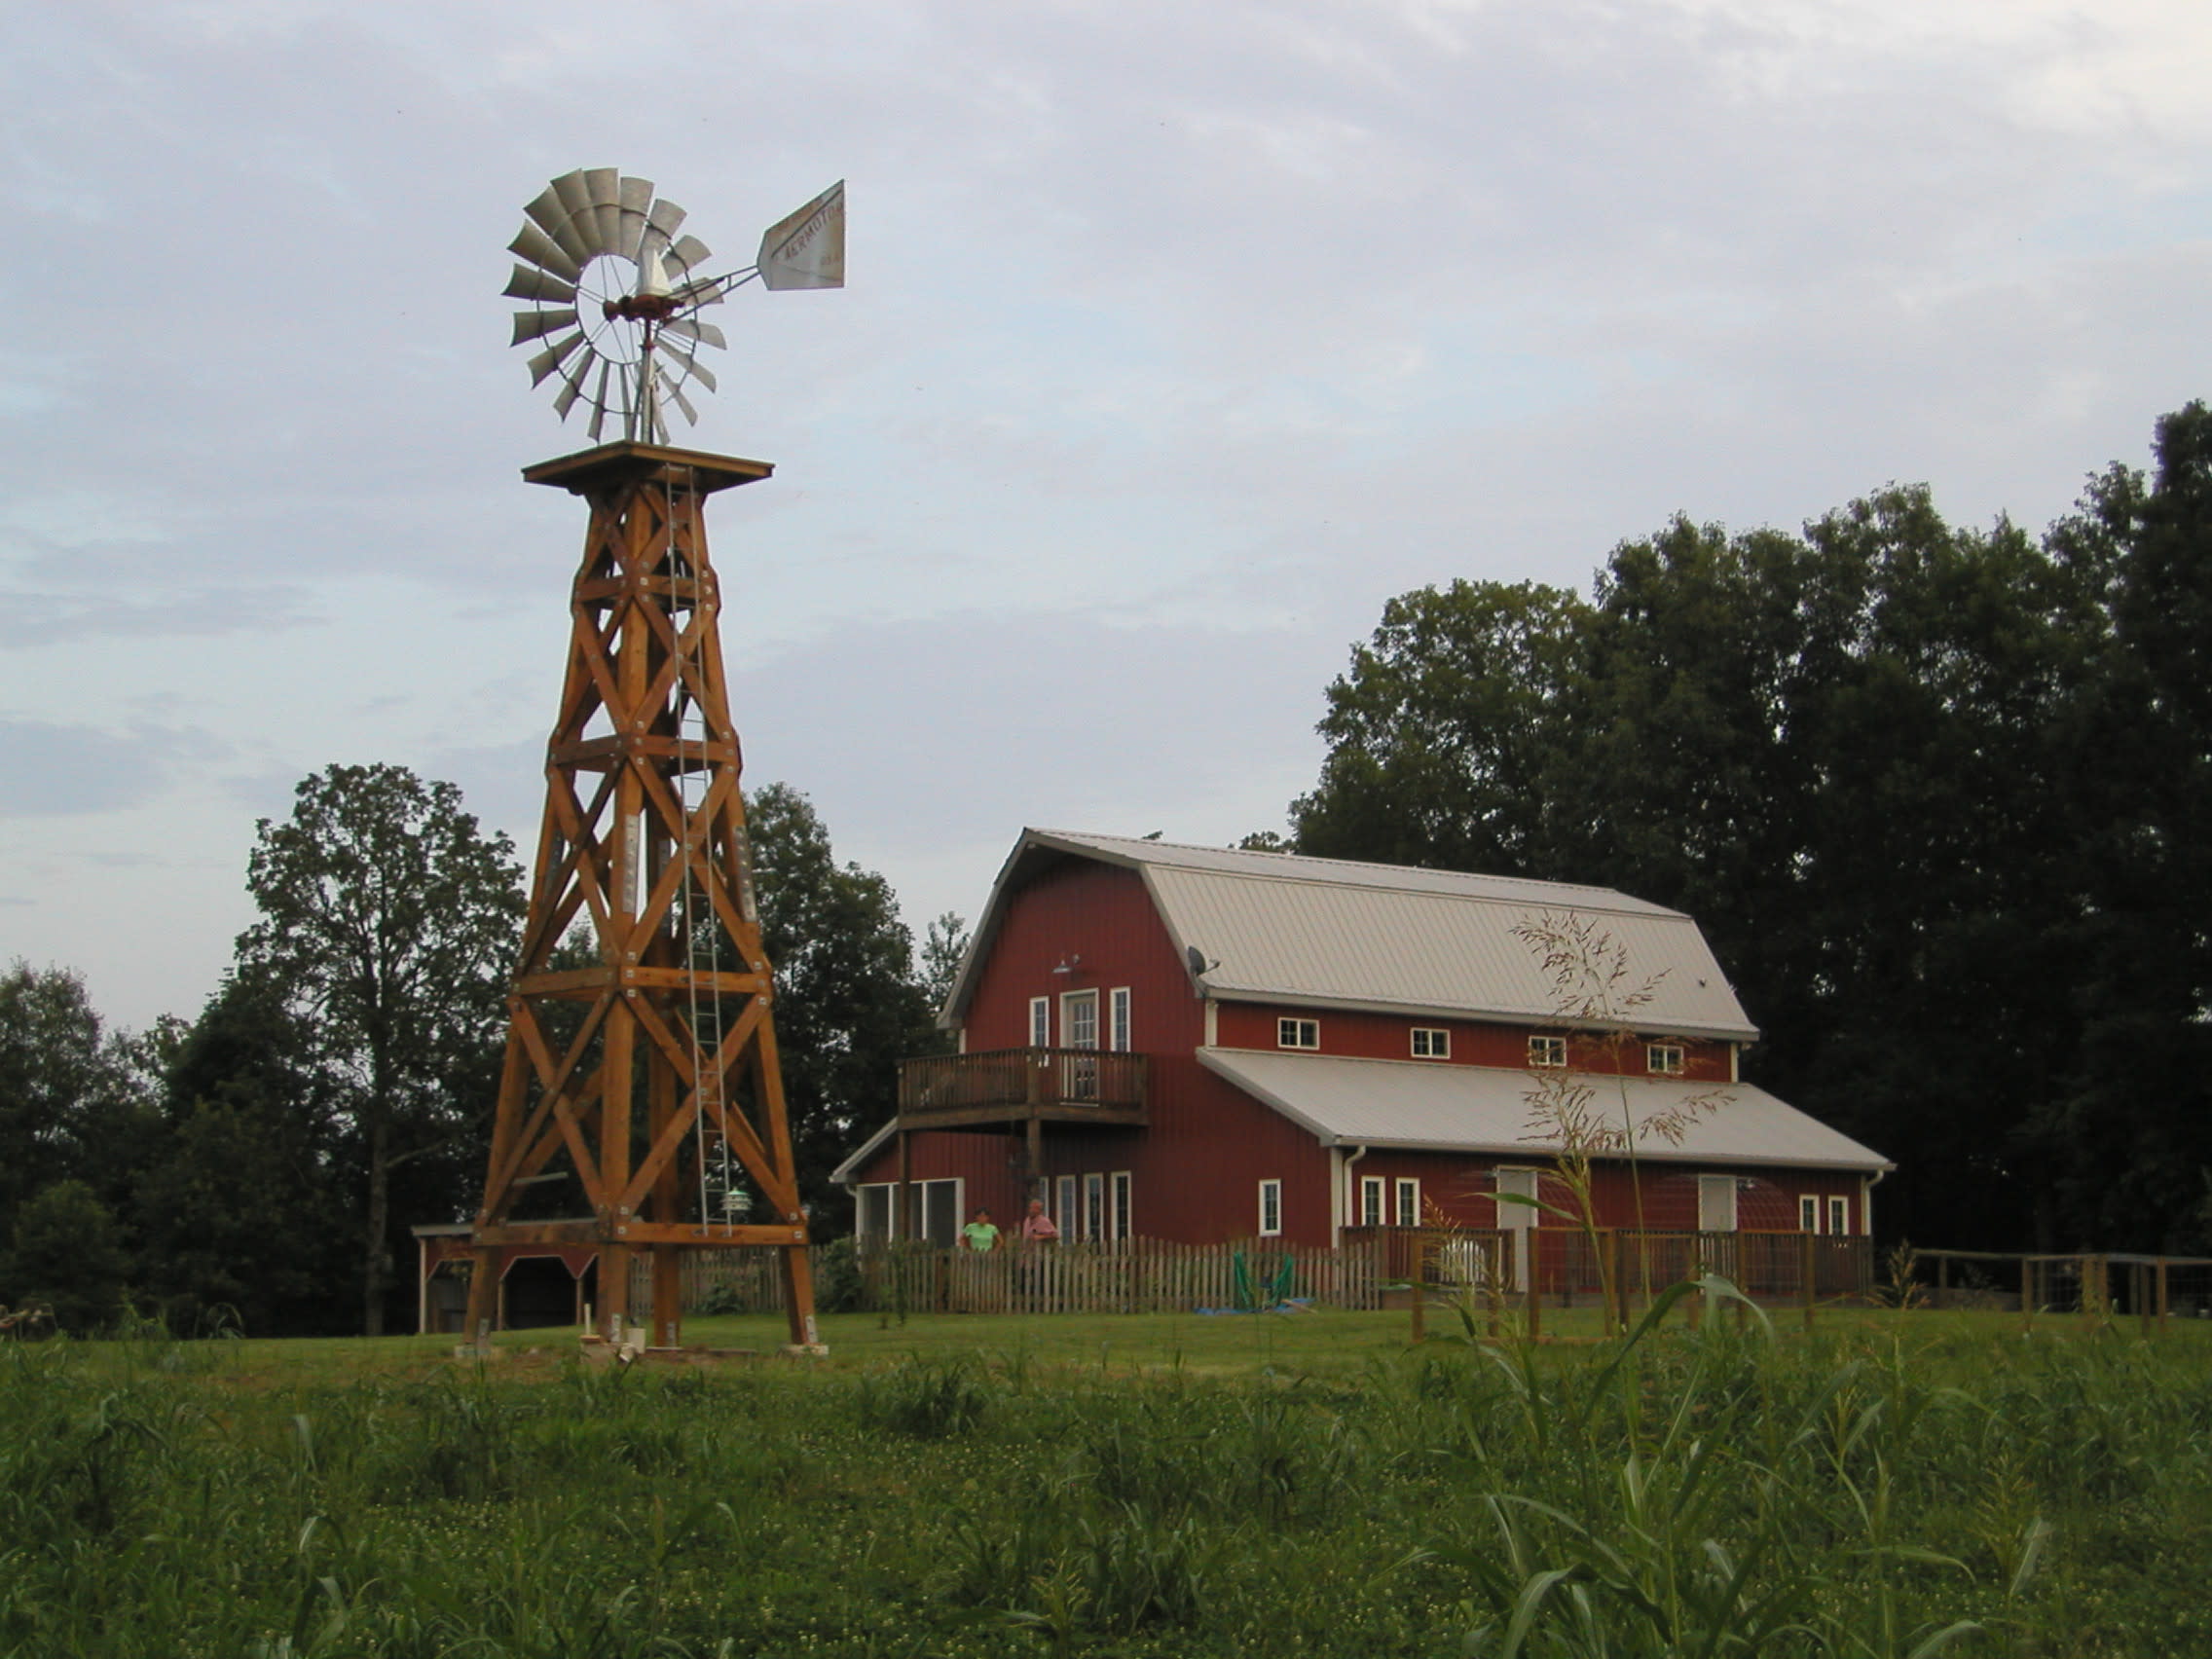 Barn and the windmill in August